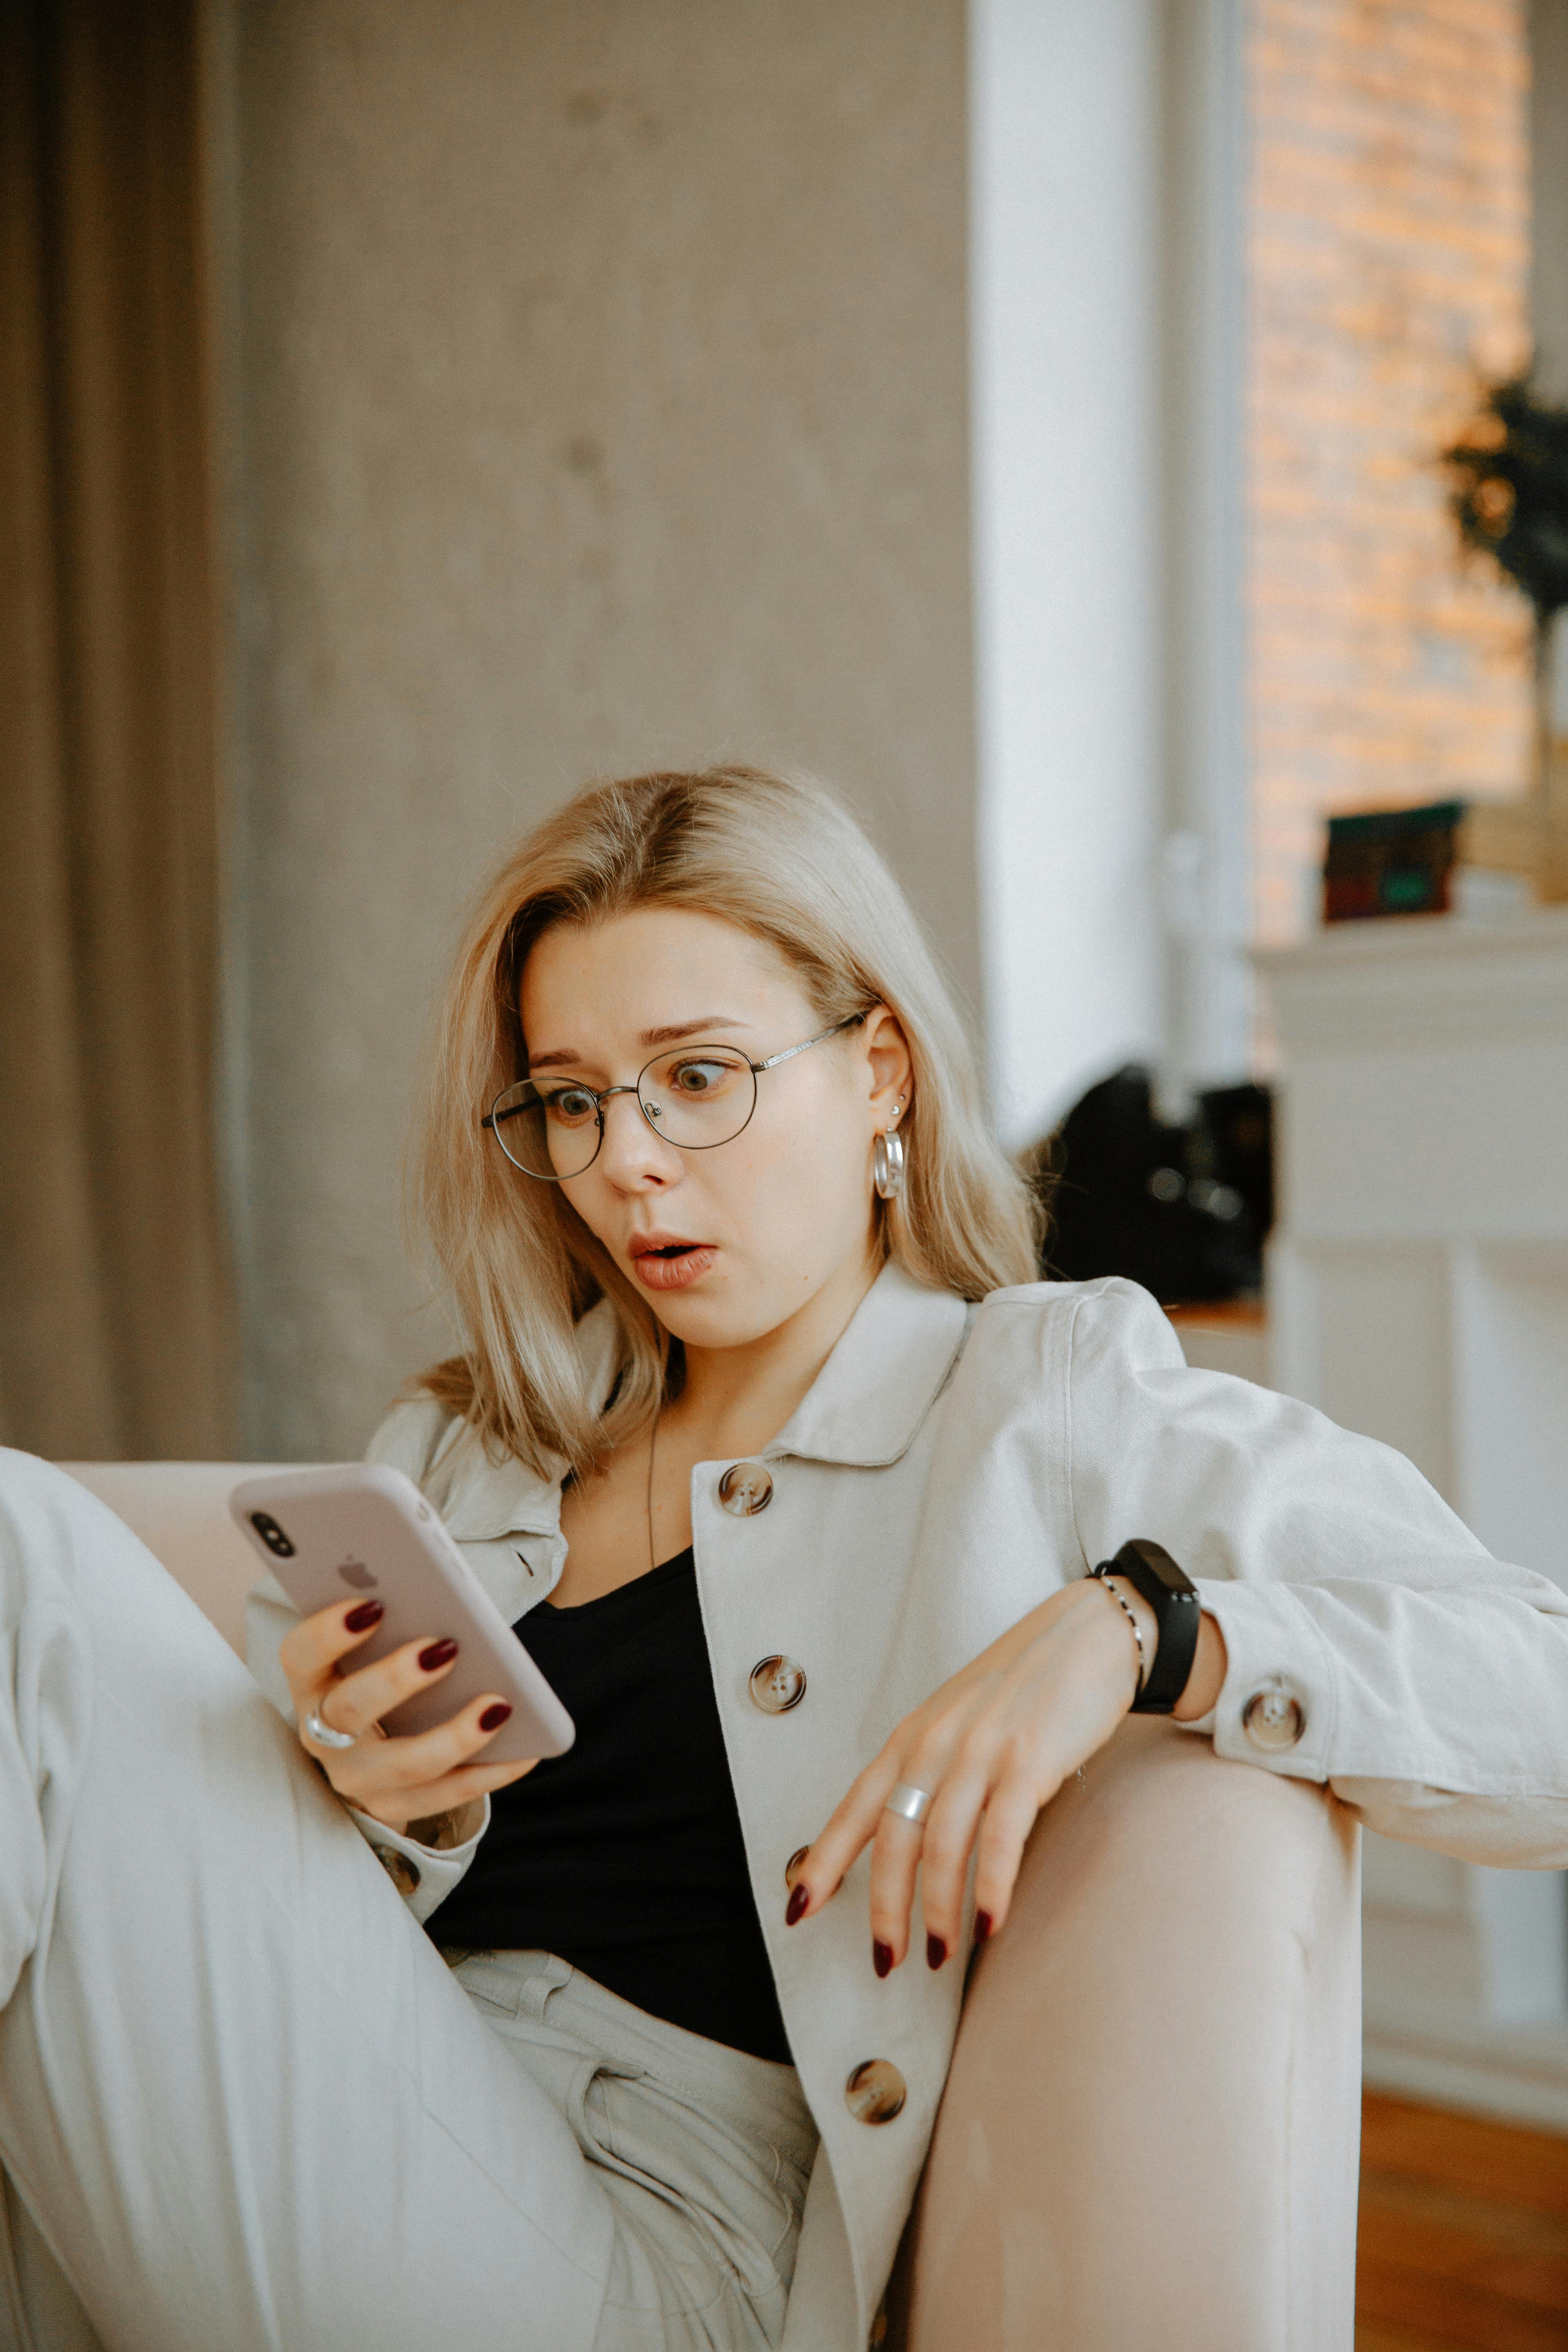 A shocked woman looking at a phone | Source: Pexels